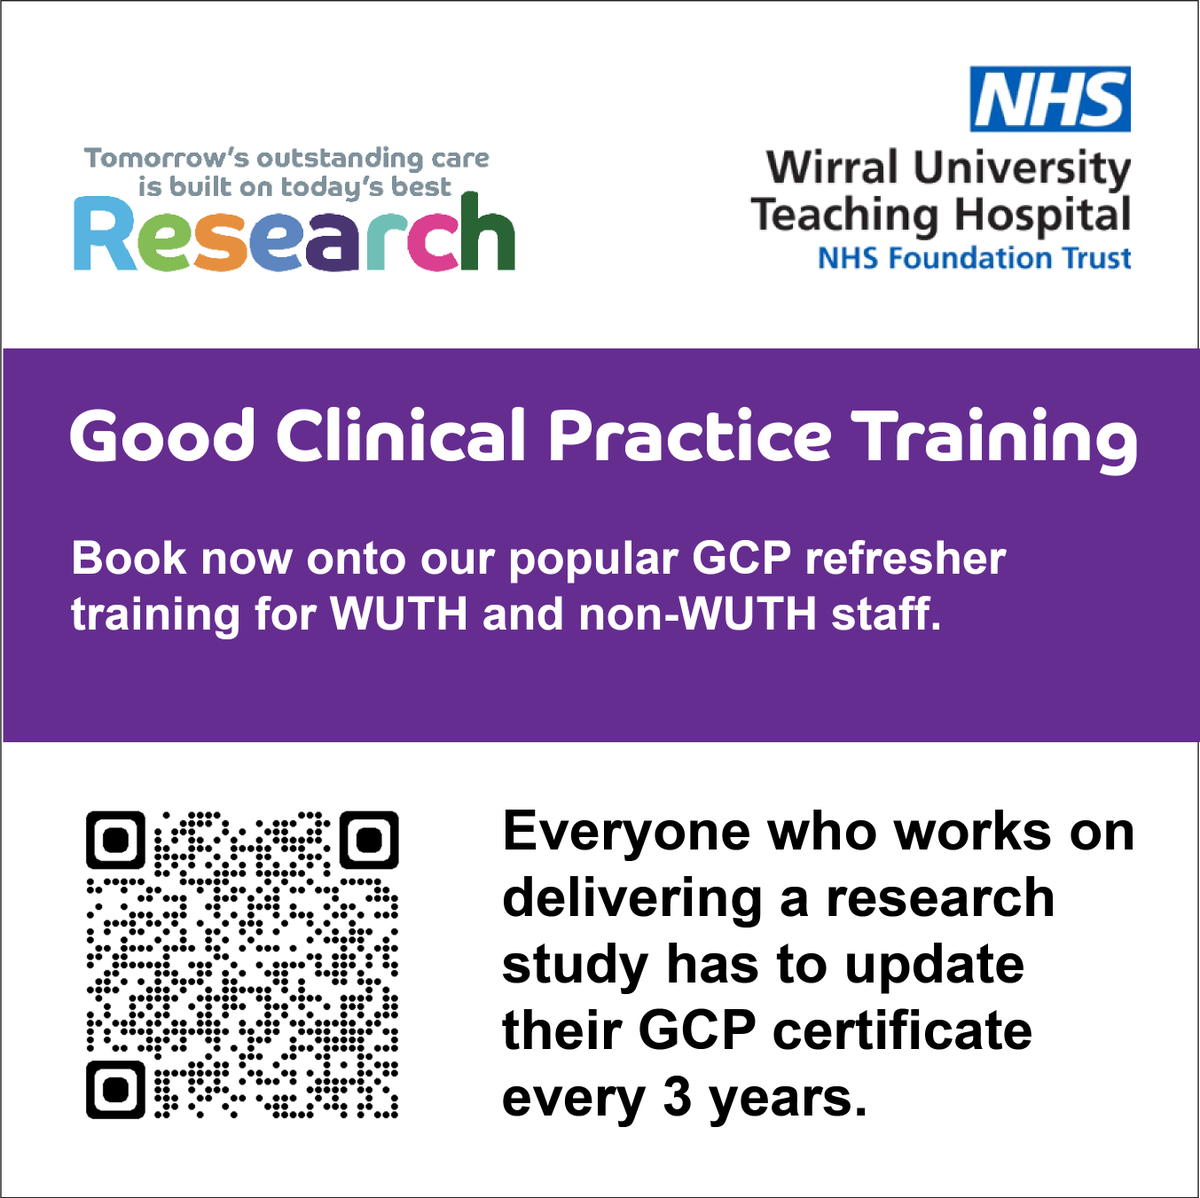 Our Research Team are now taking bookings for our Good Clinical Practice refresher training. Book early! Places are limited. Open to WUTH and non-WUTH staff. @WUTHresearch @NIHRresearch